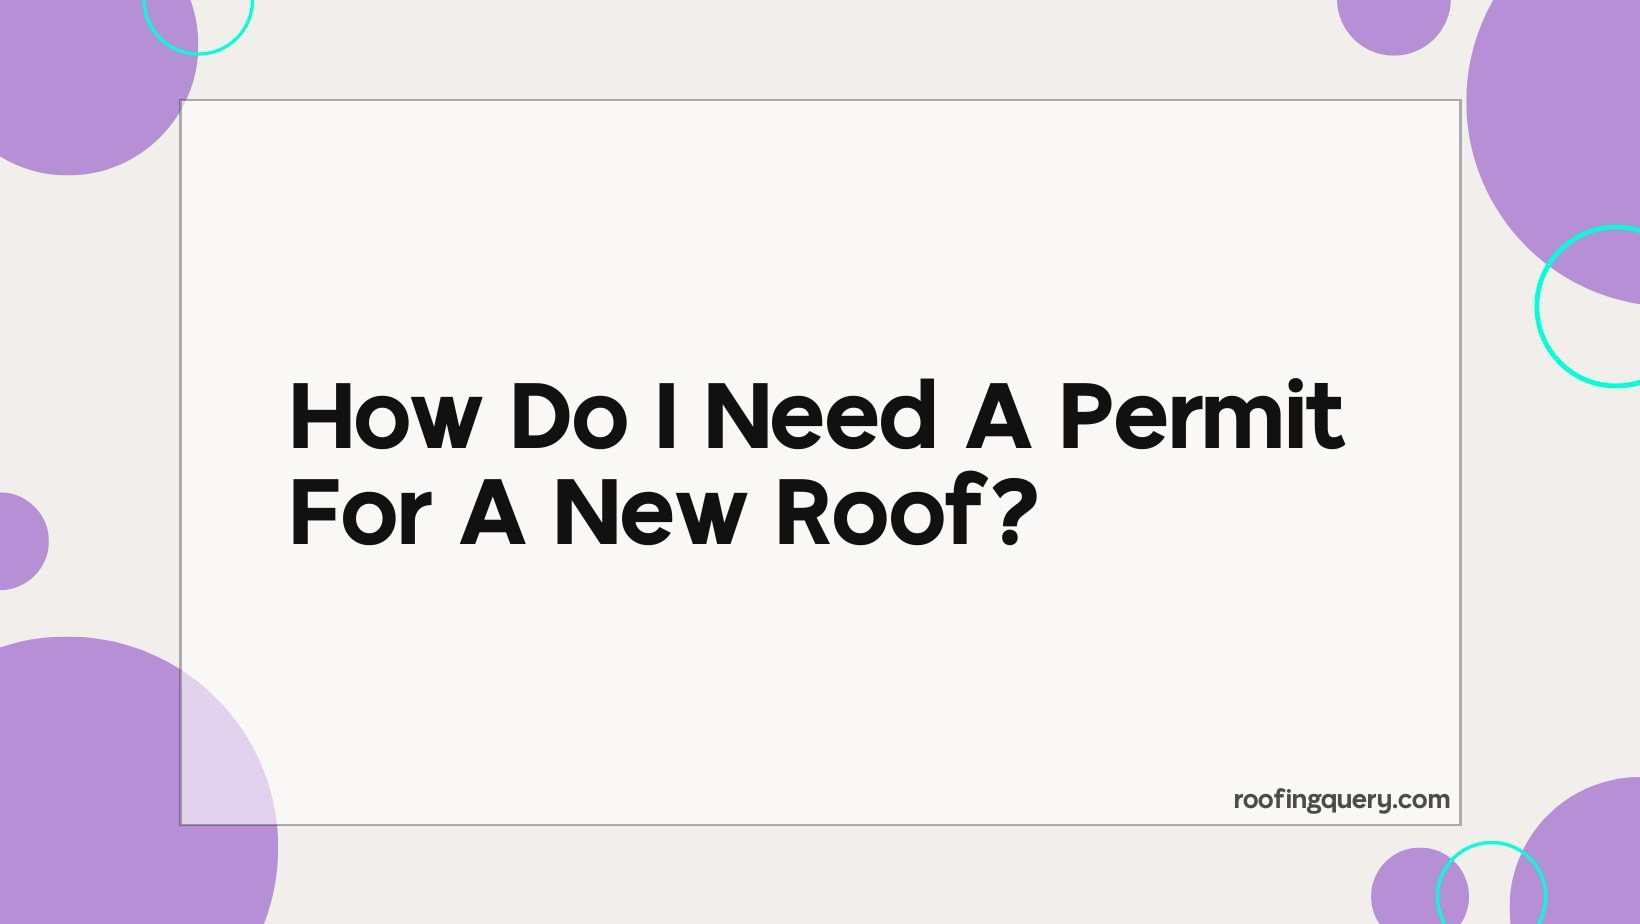 Do I Need A Permit For A New Roof